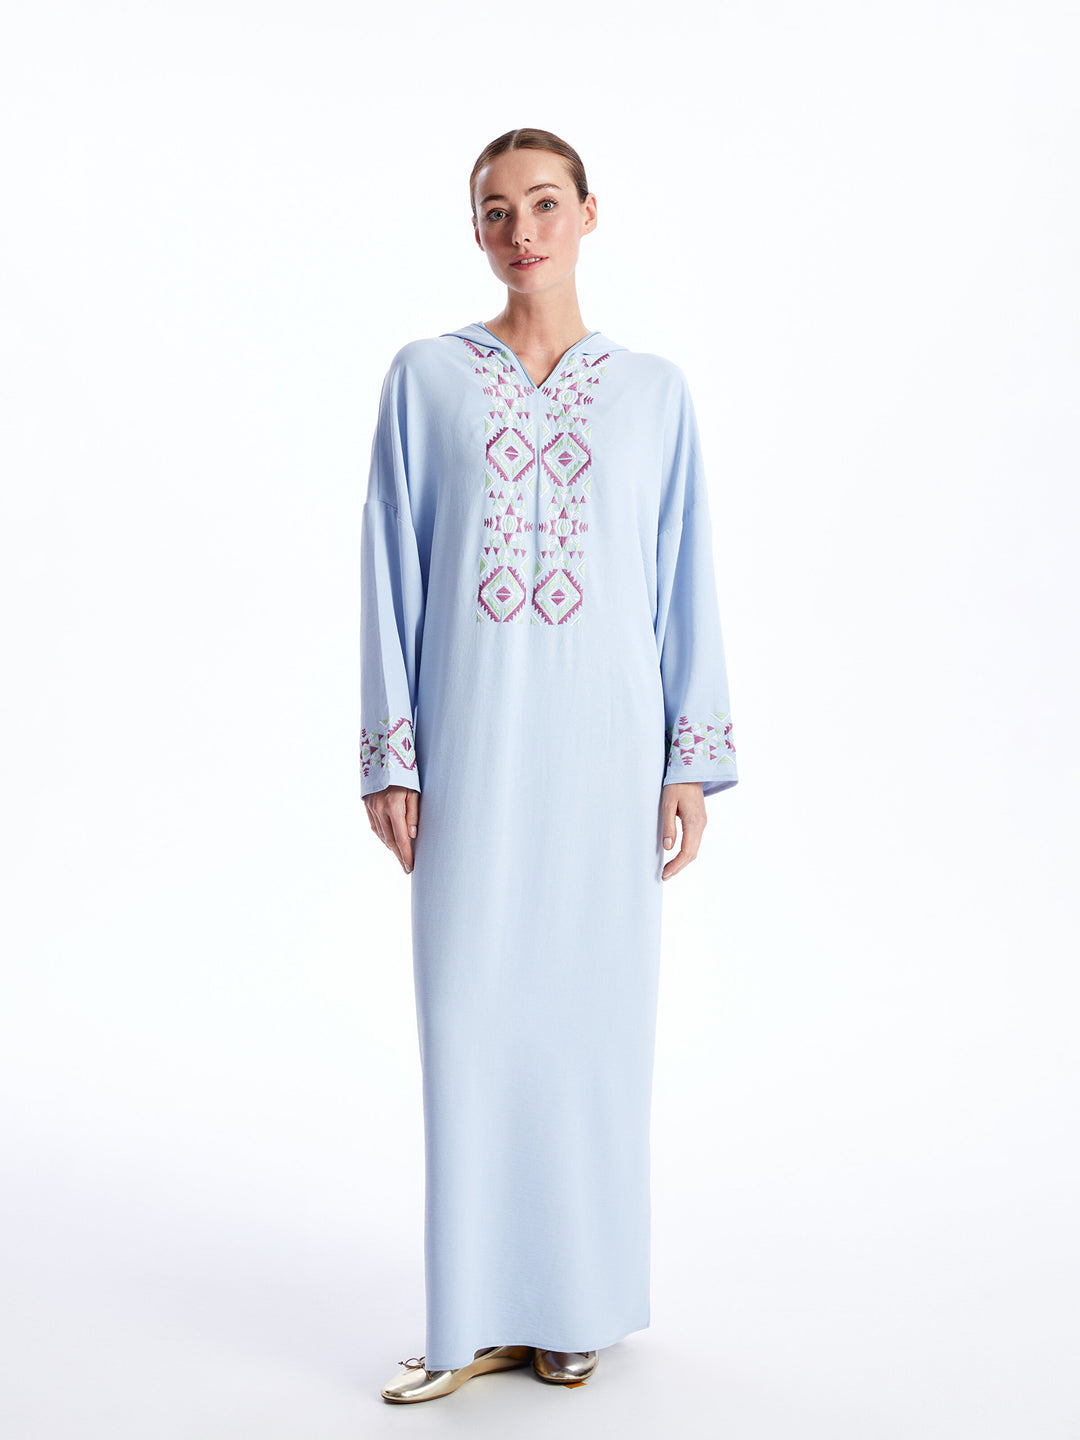 Hooded Embroidered Long Sleeve Women Dress